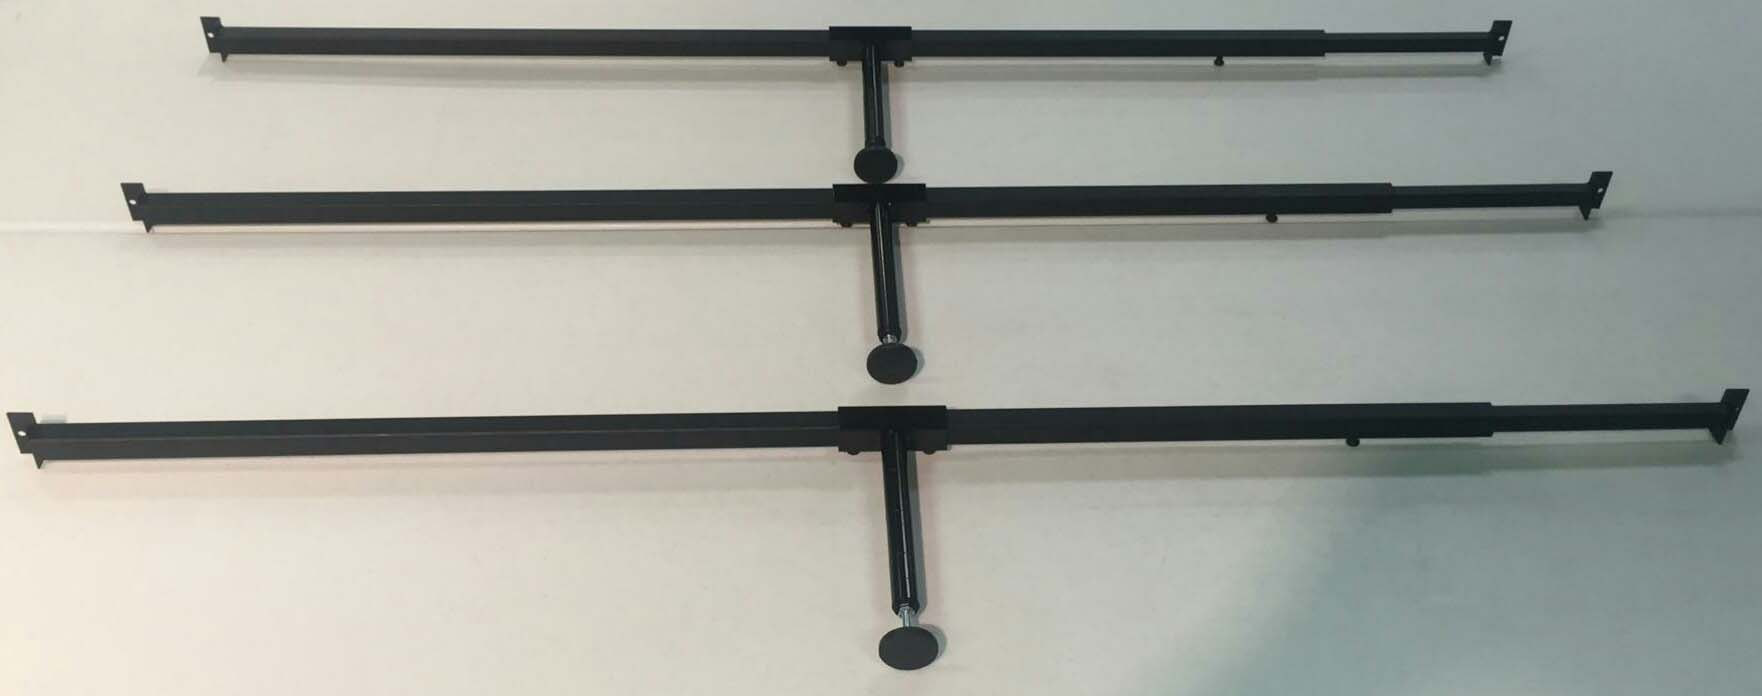 3 NoSag Supports included, all with variable widths to various bed sizes.